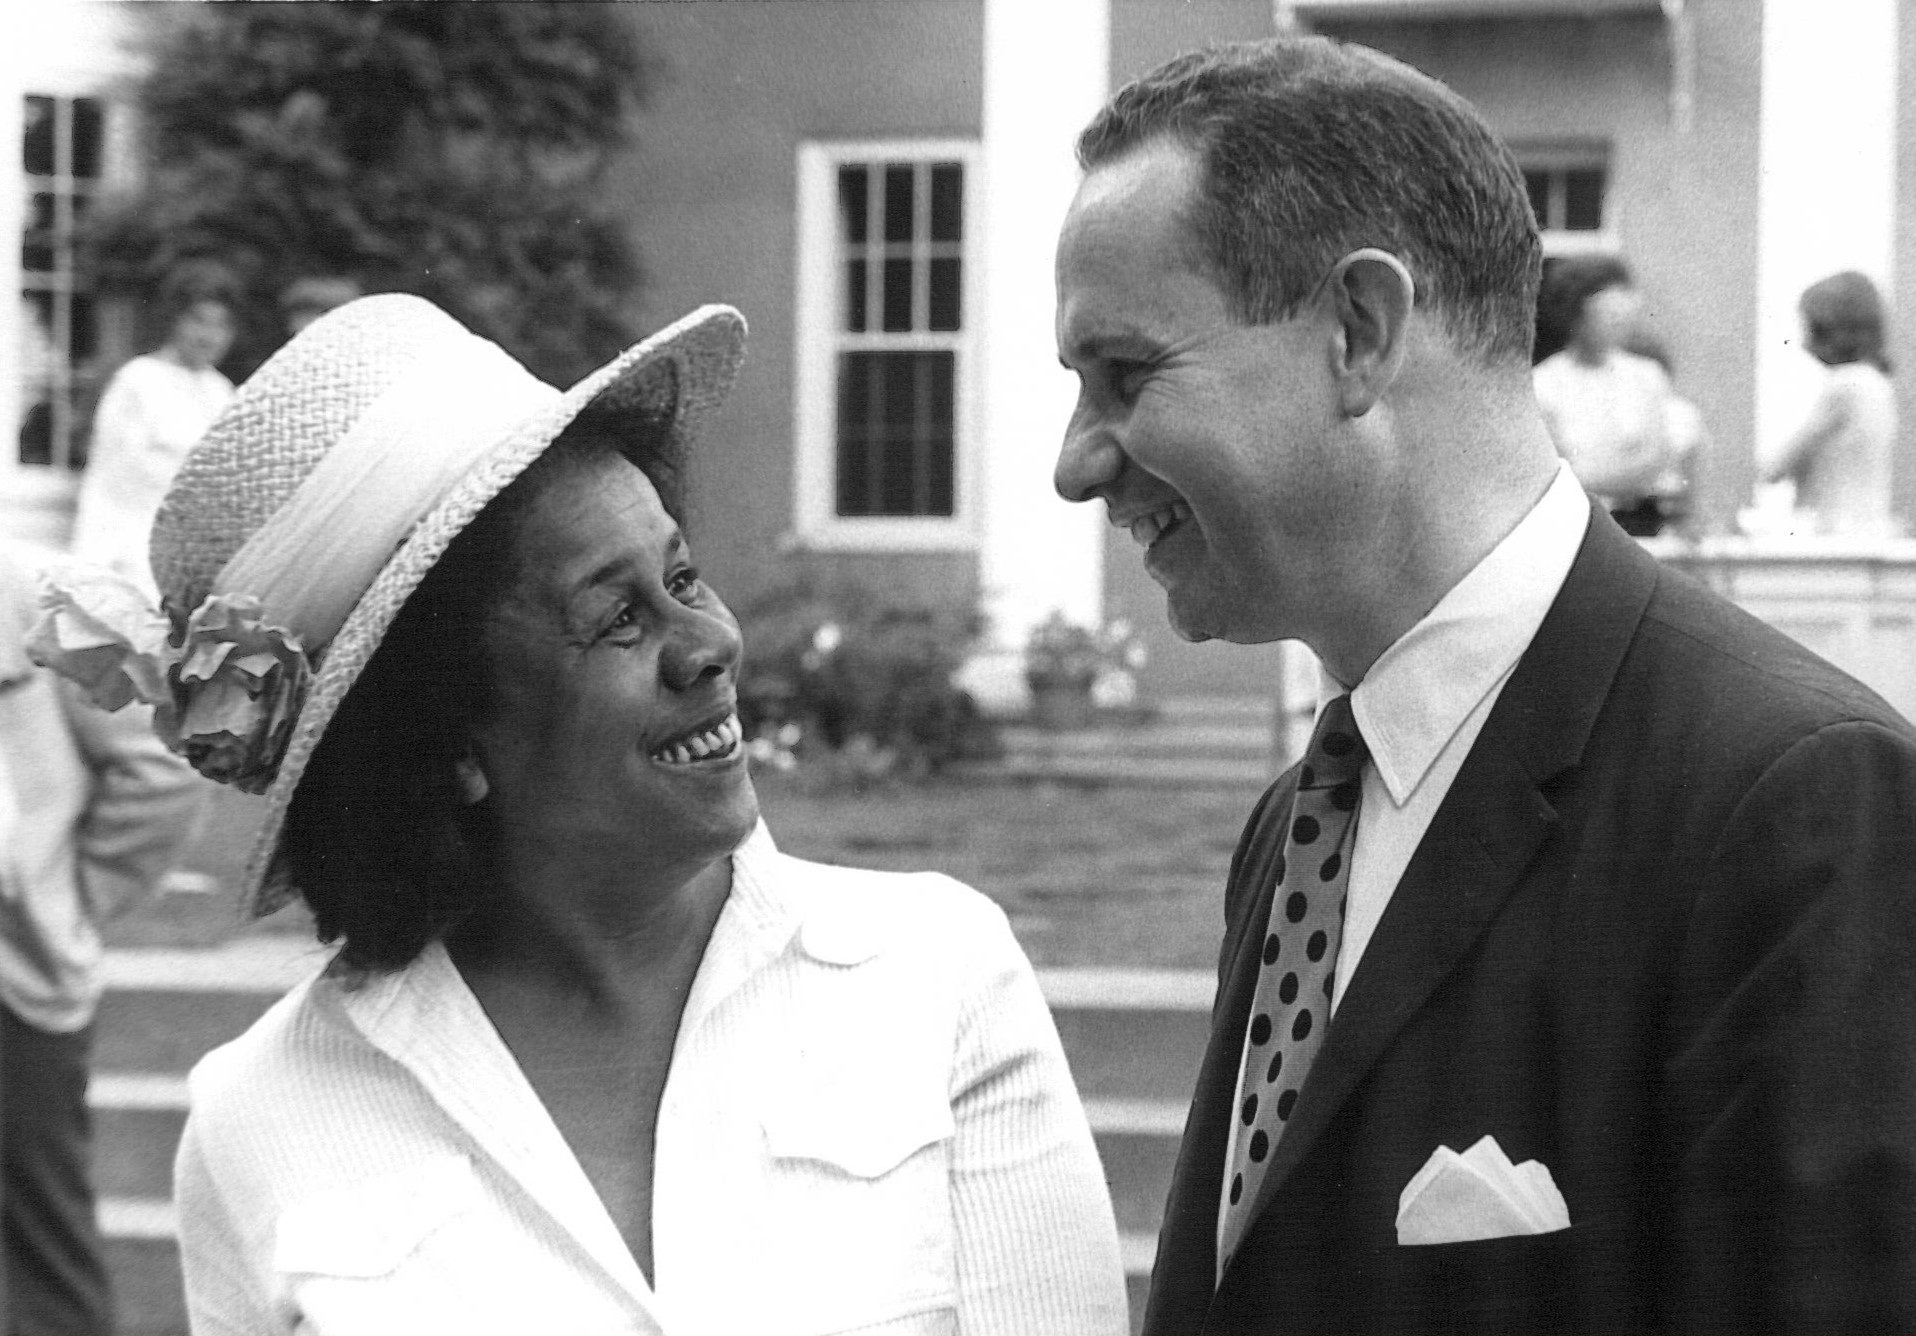 Black and white photo of Marie Singer and Howard Parad speaking